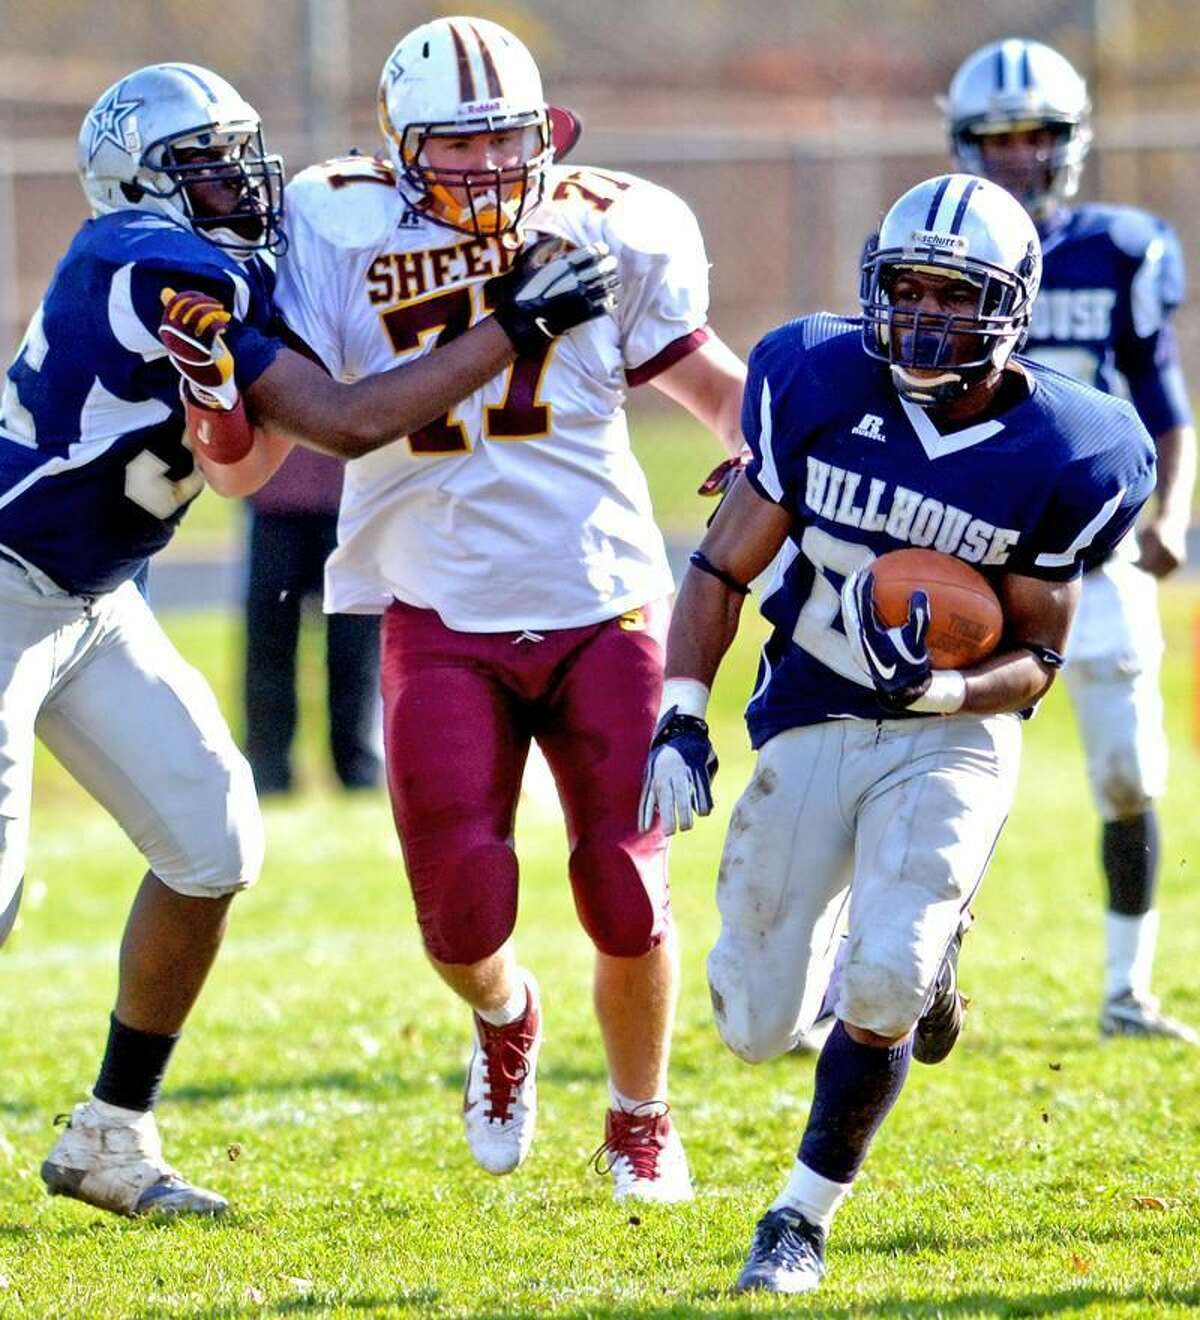 Photo by Sean Meenaghan/Register Hillhouse running back Andre Anderson cut through Sheehan's defense before being stopped on the 10-yard line in the second quarter.